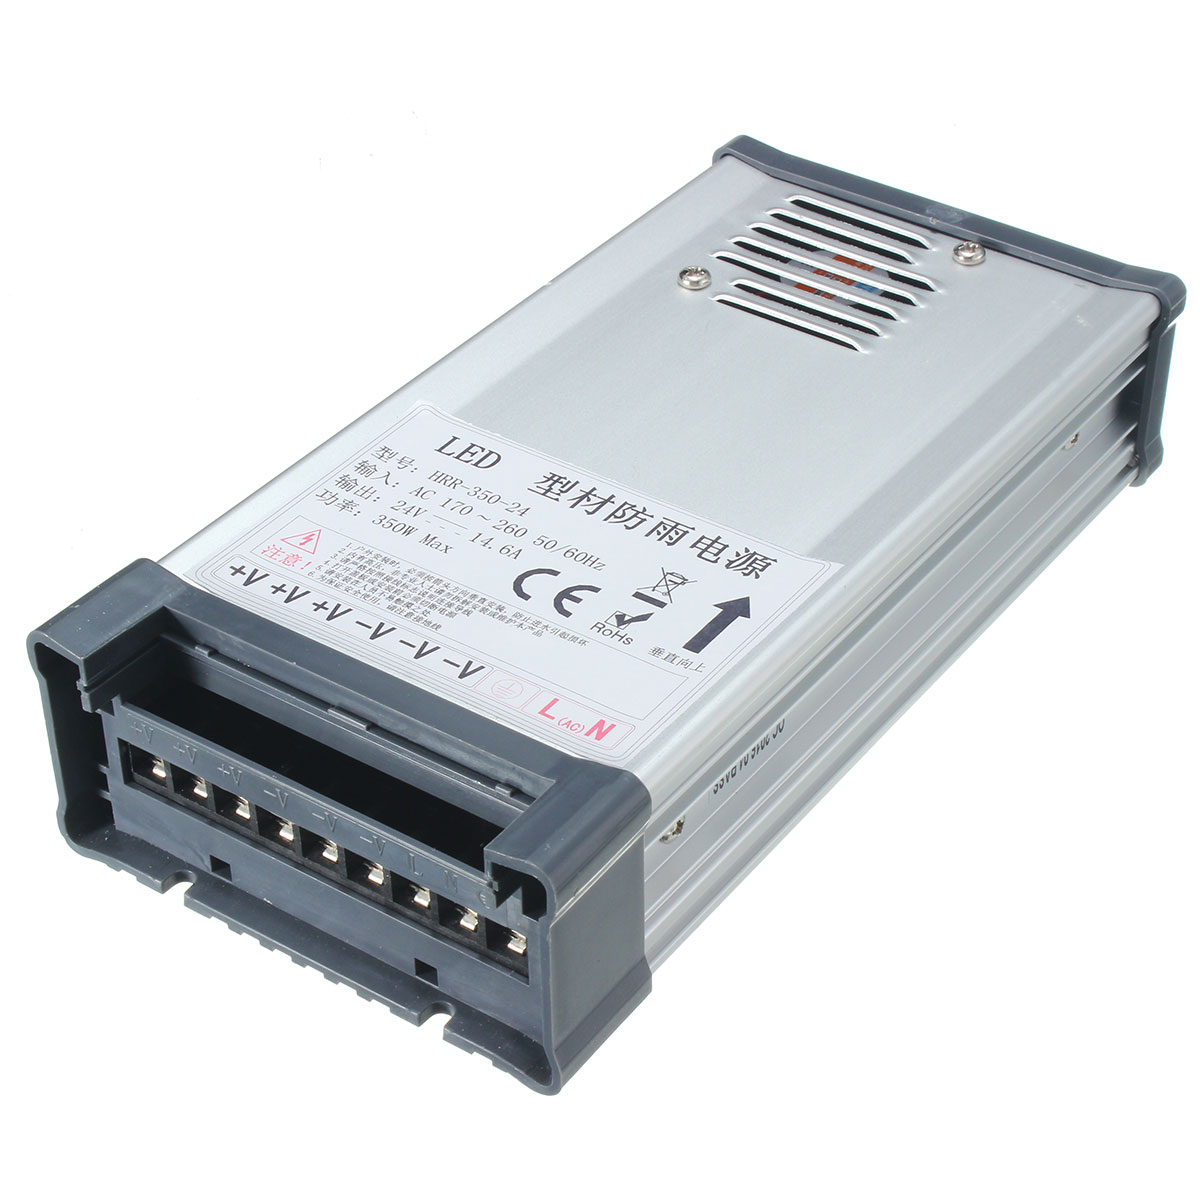 IP65-AC-170V-264V-To-DC-24V-350W-Switching-Power-Supply-Driver-Adapter-1057696